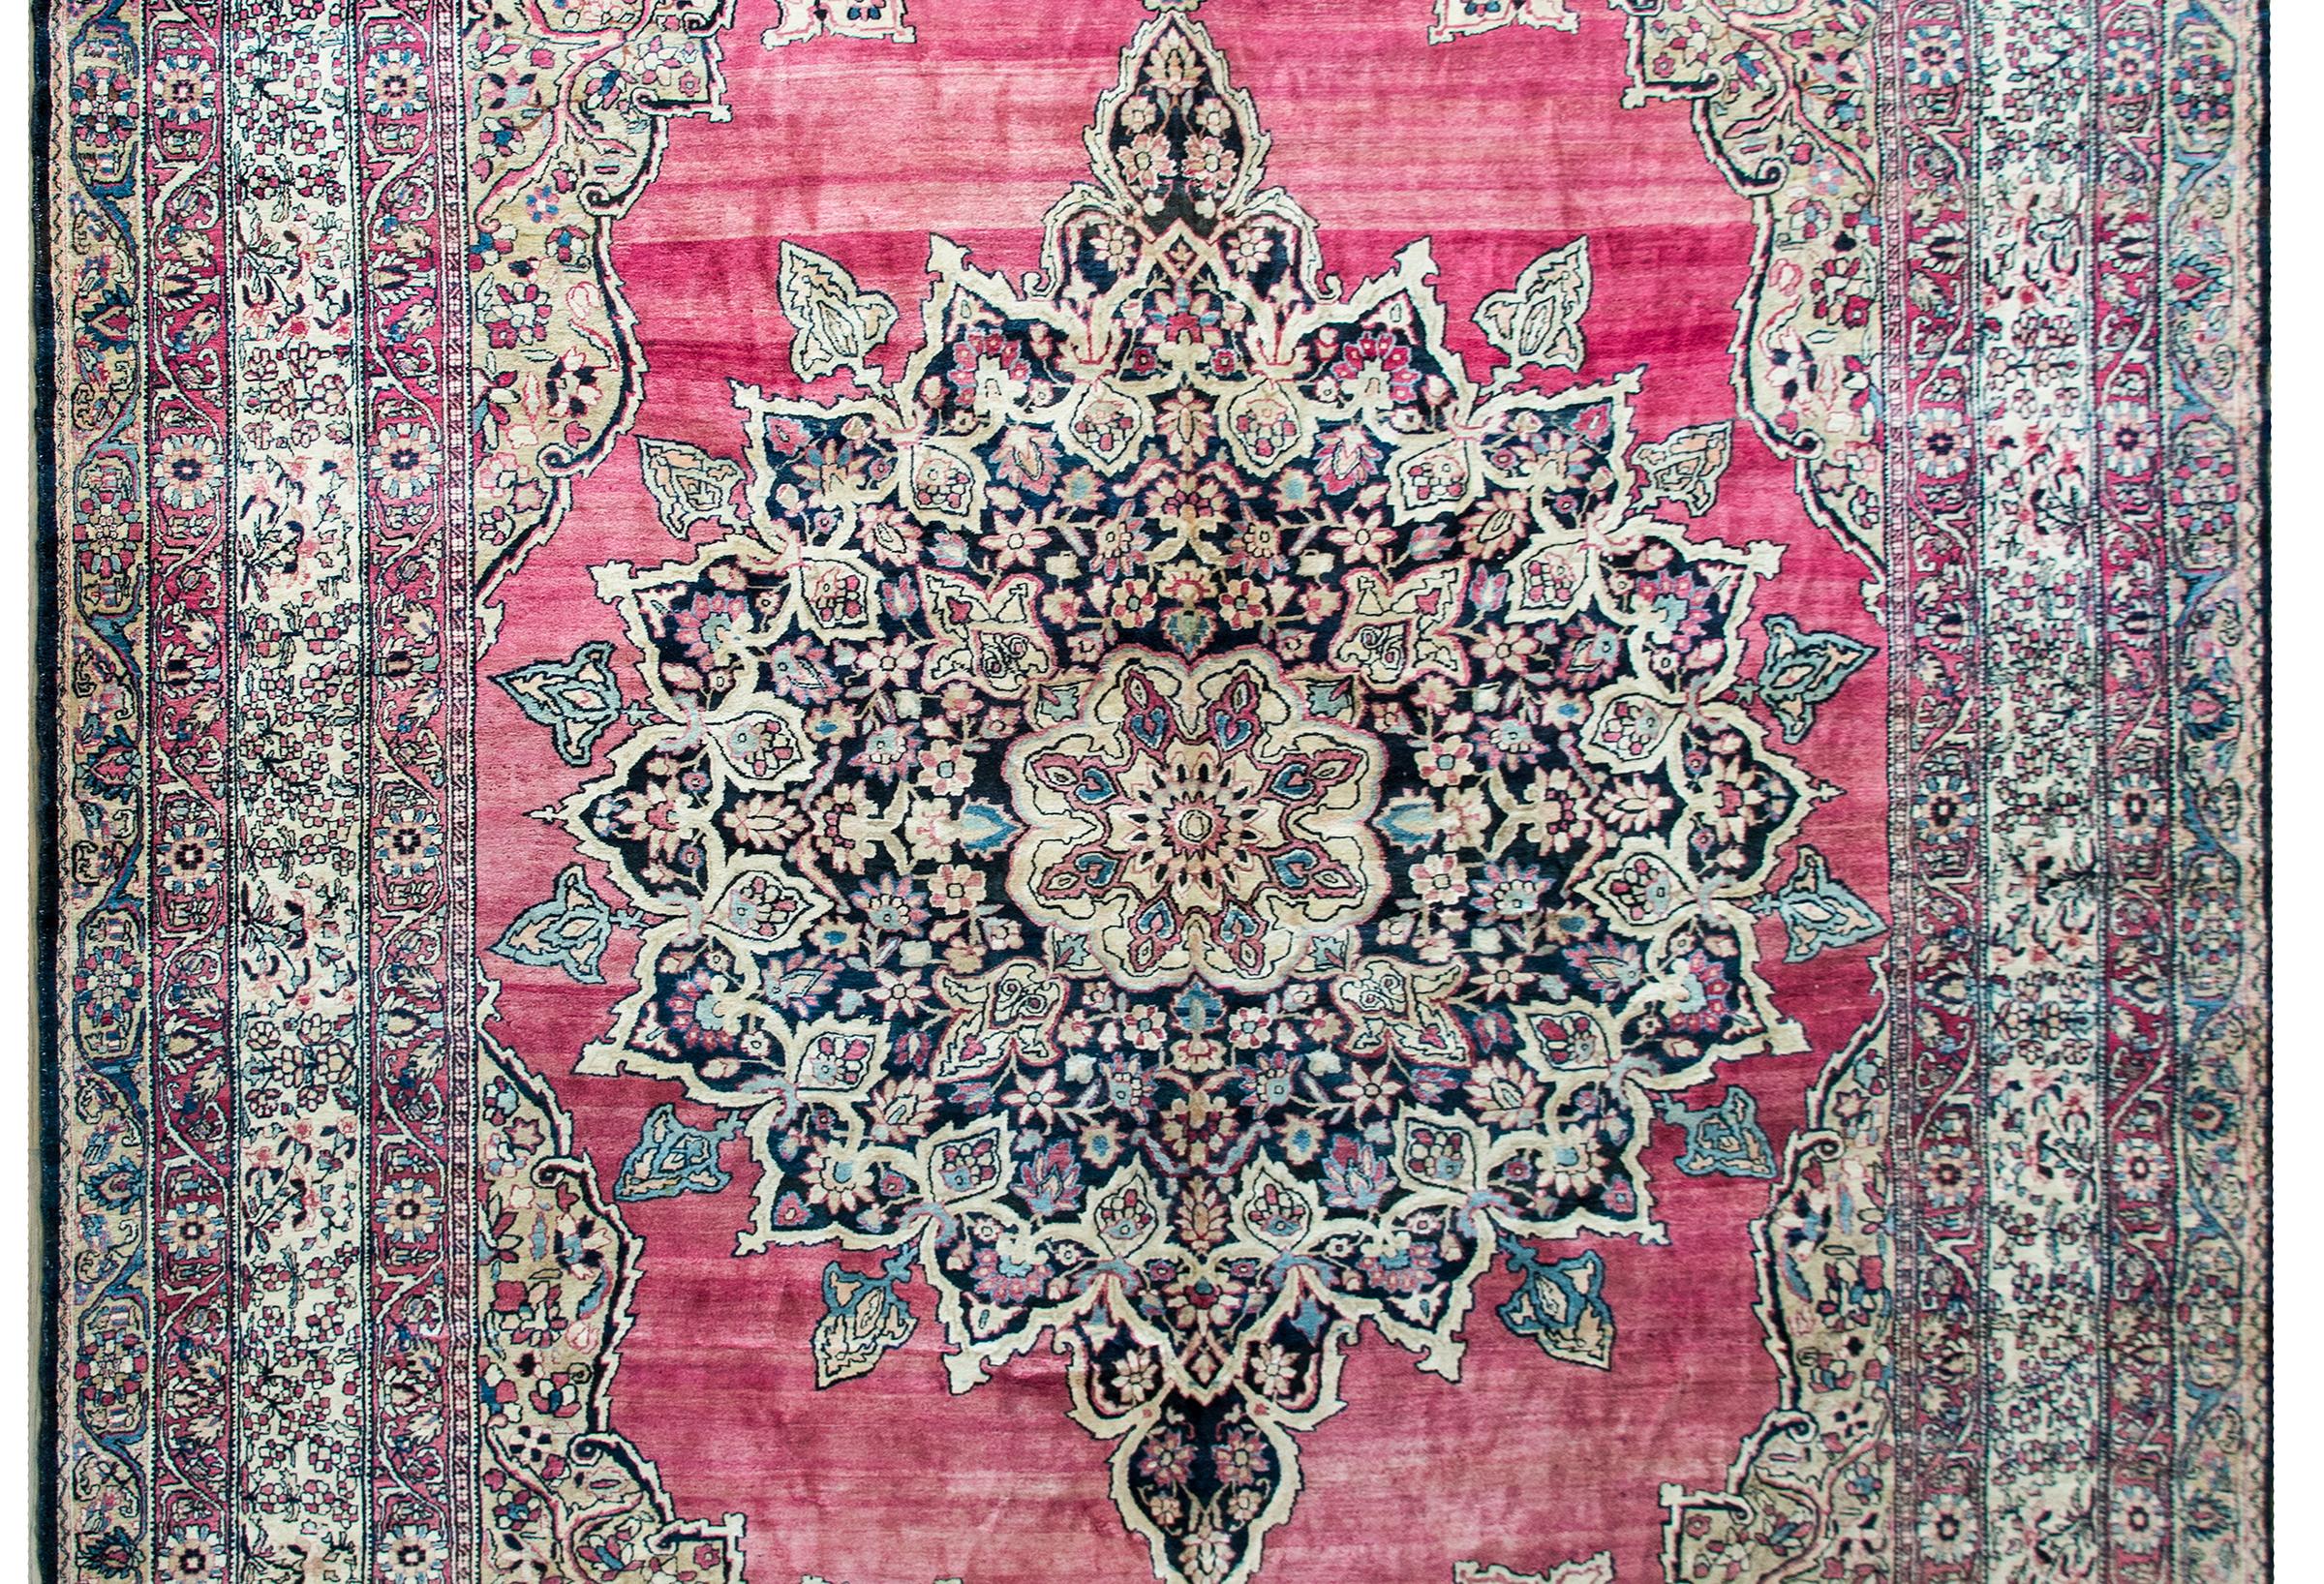 A stunning late 19th century Persian Lavar Kirman rug with the most wonderful central floral medallion woven in traditional Kirman colors of light and dark indigo, pink, and cream, and set against an incredible abrash cranberry background, and all